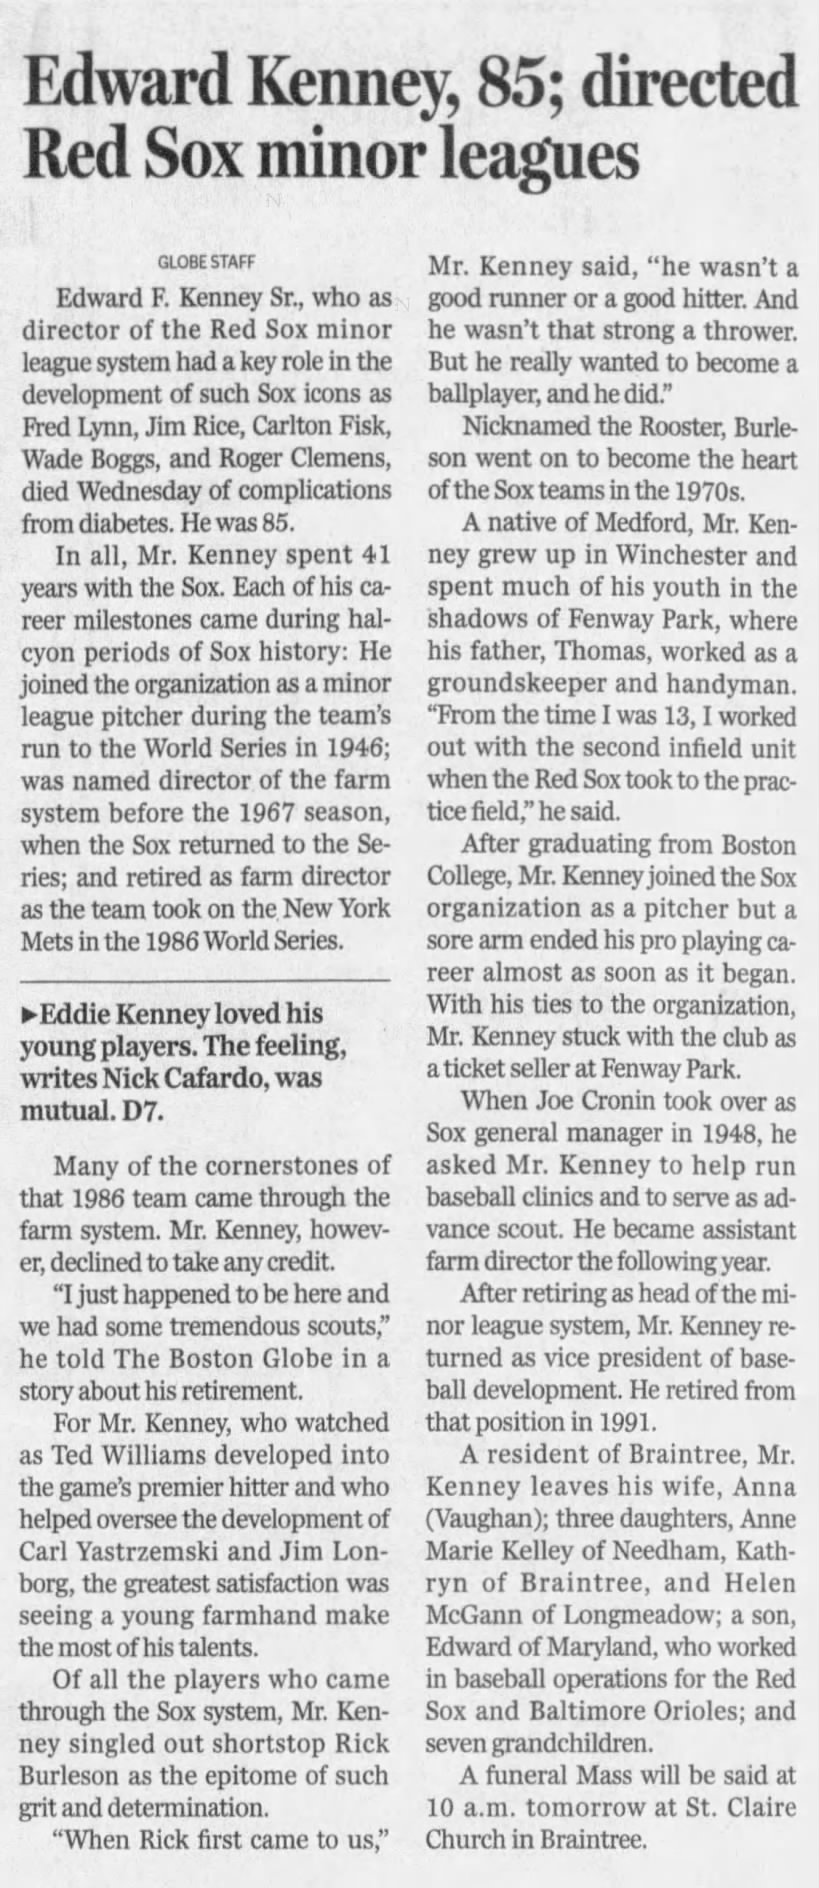 Edward Kenney, 85; directed Red Sox minor leagues